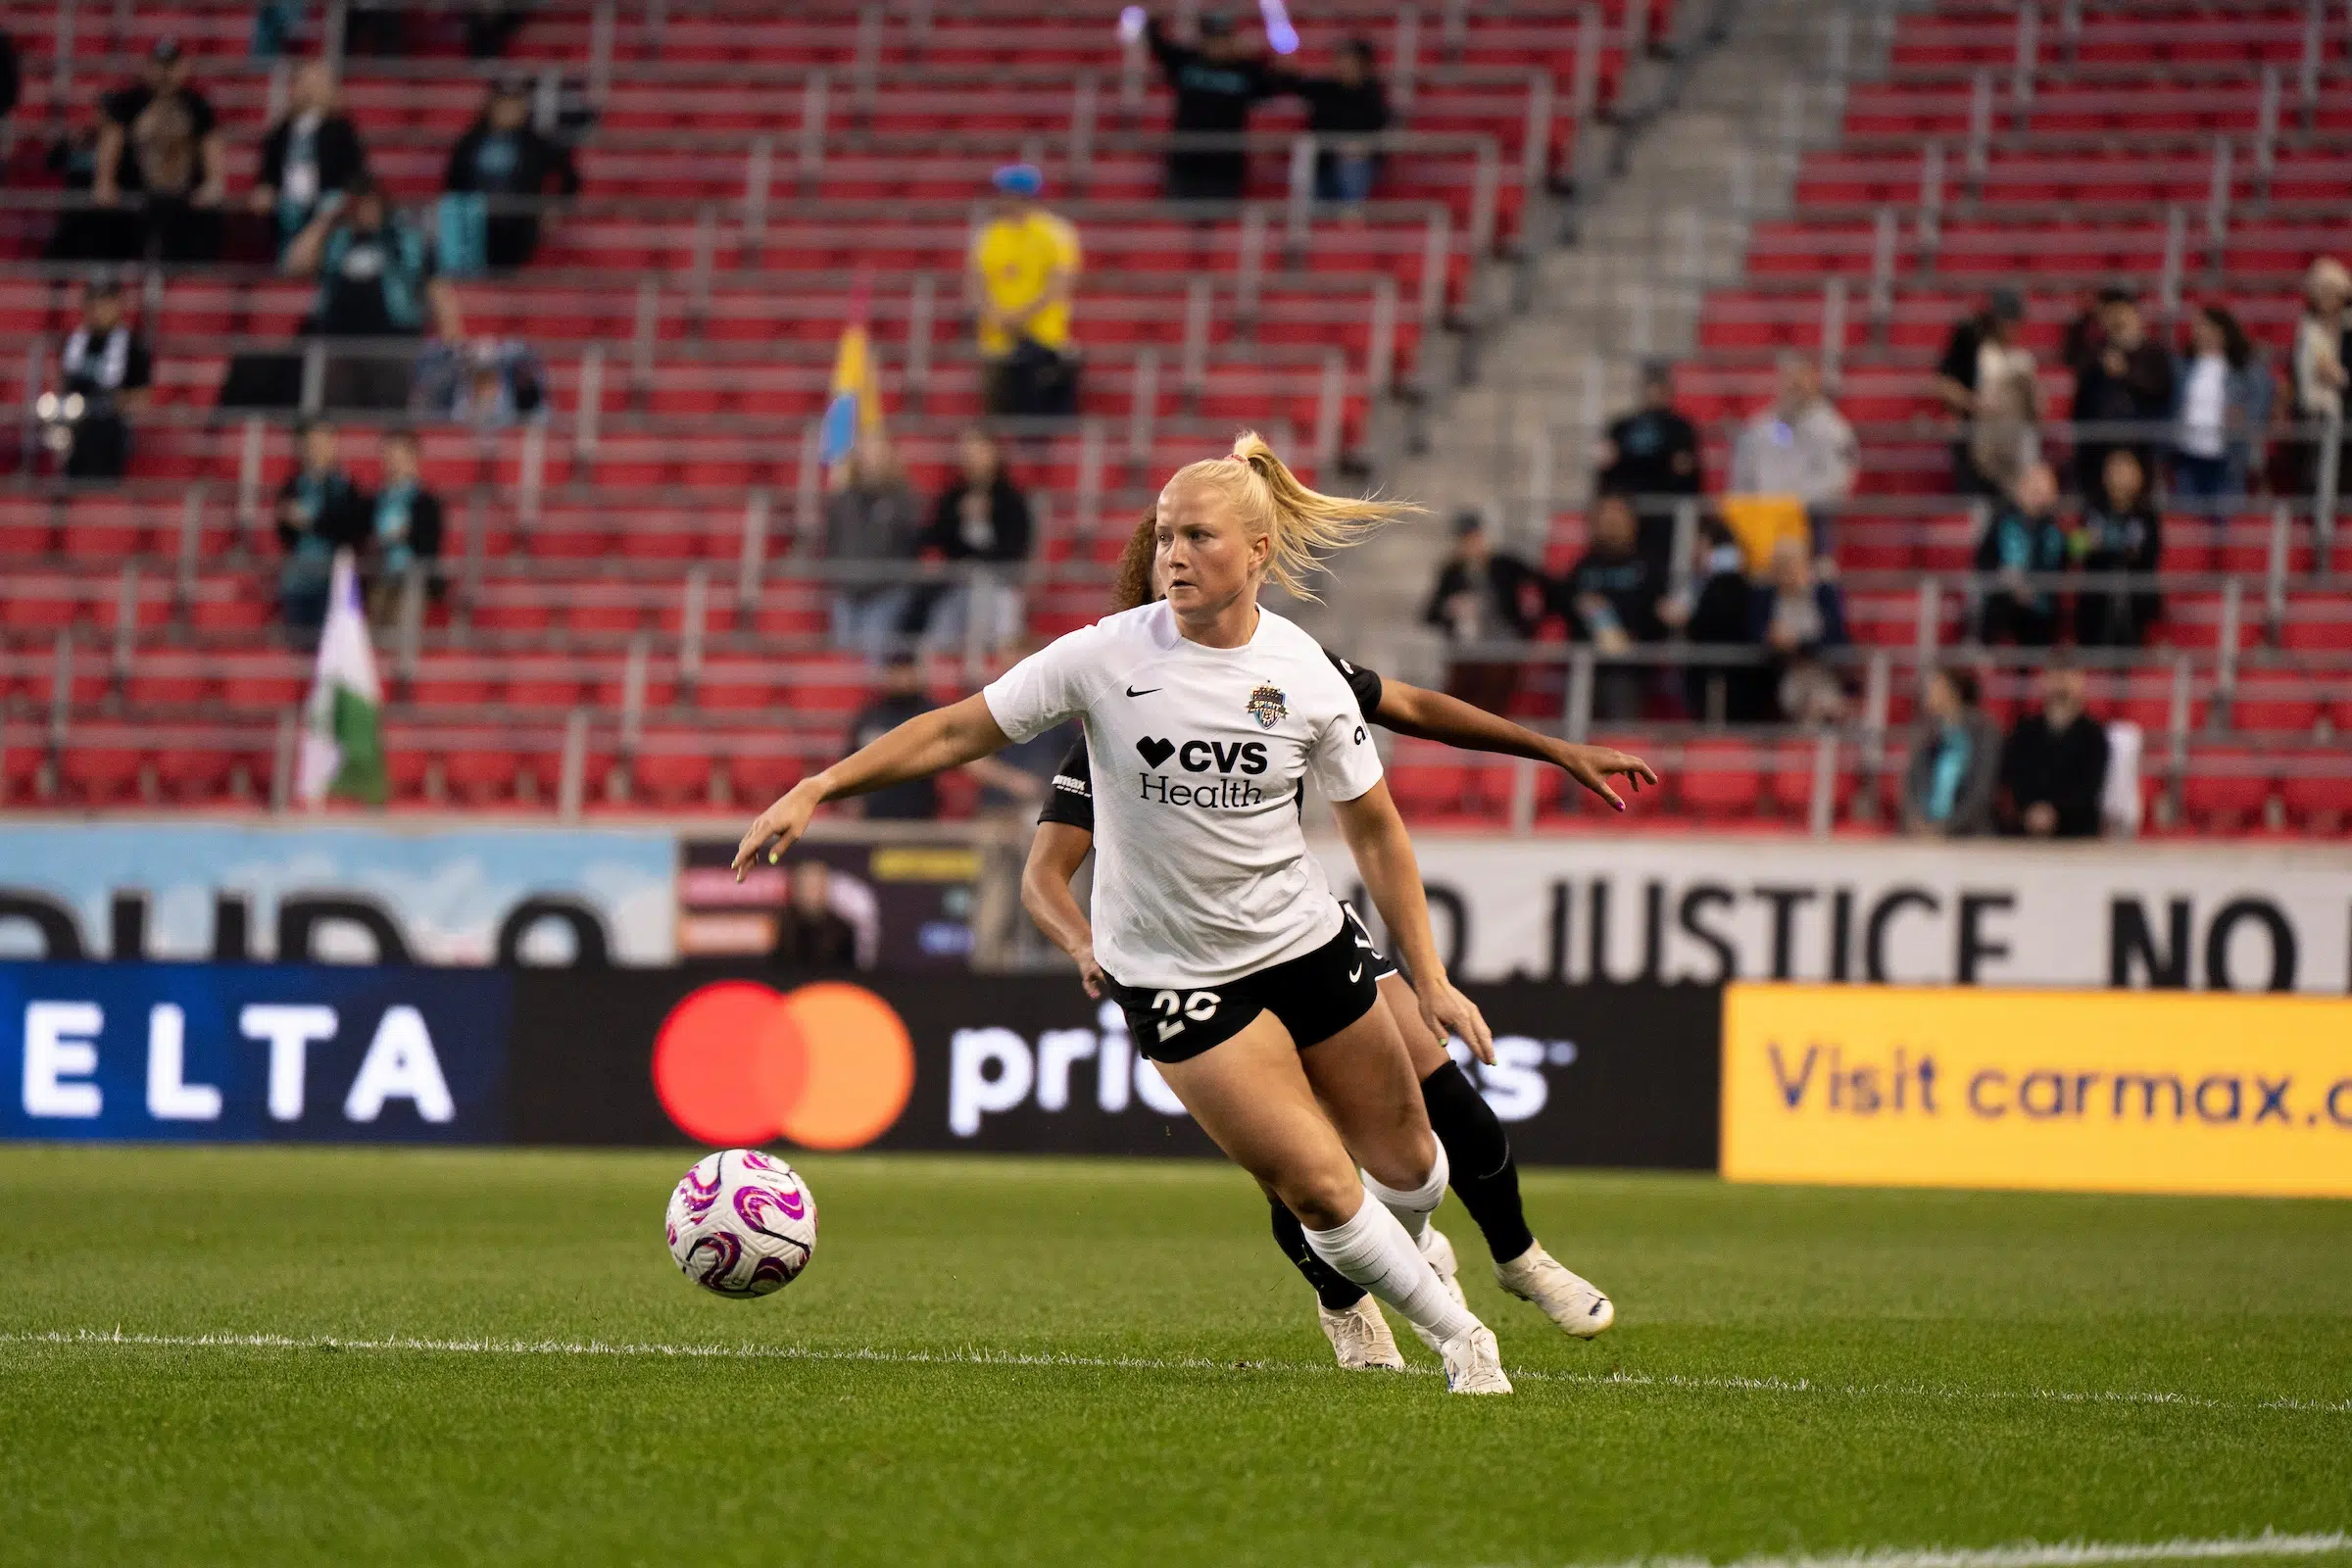 Civana Kuhlmann looks forward as she dribbles a soccer ball. She is wearing a white top, black shorts and white socks. A defender is barely visible as she tries to chase Kuhlmann down.